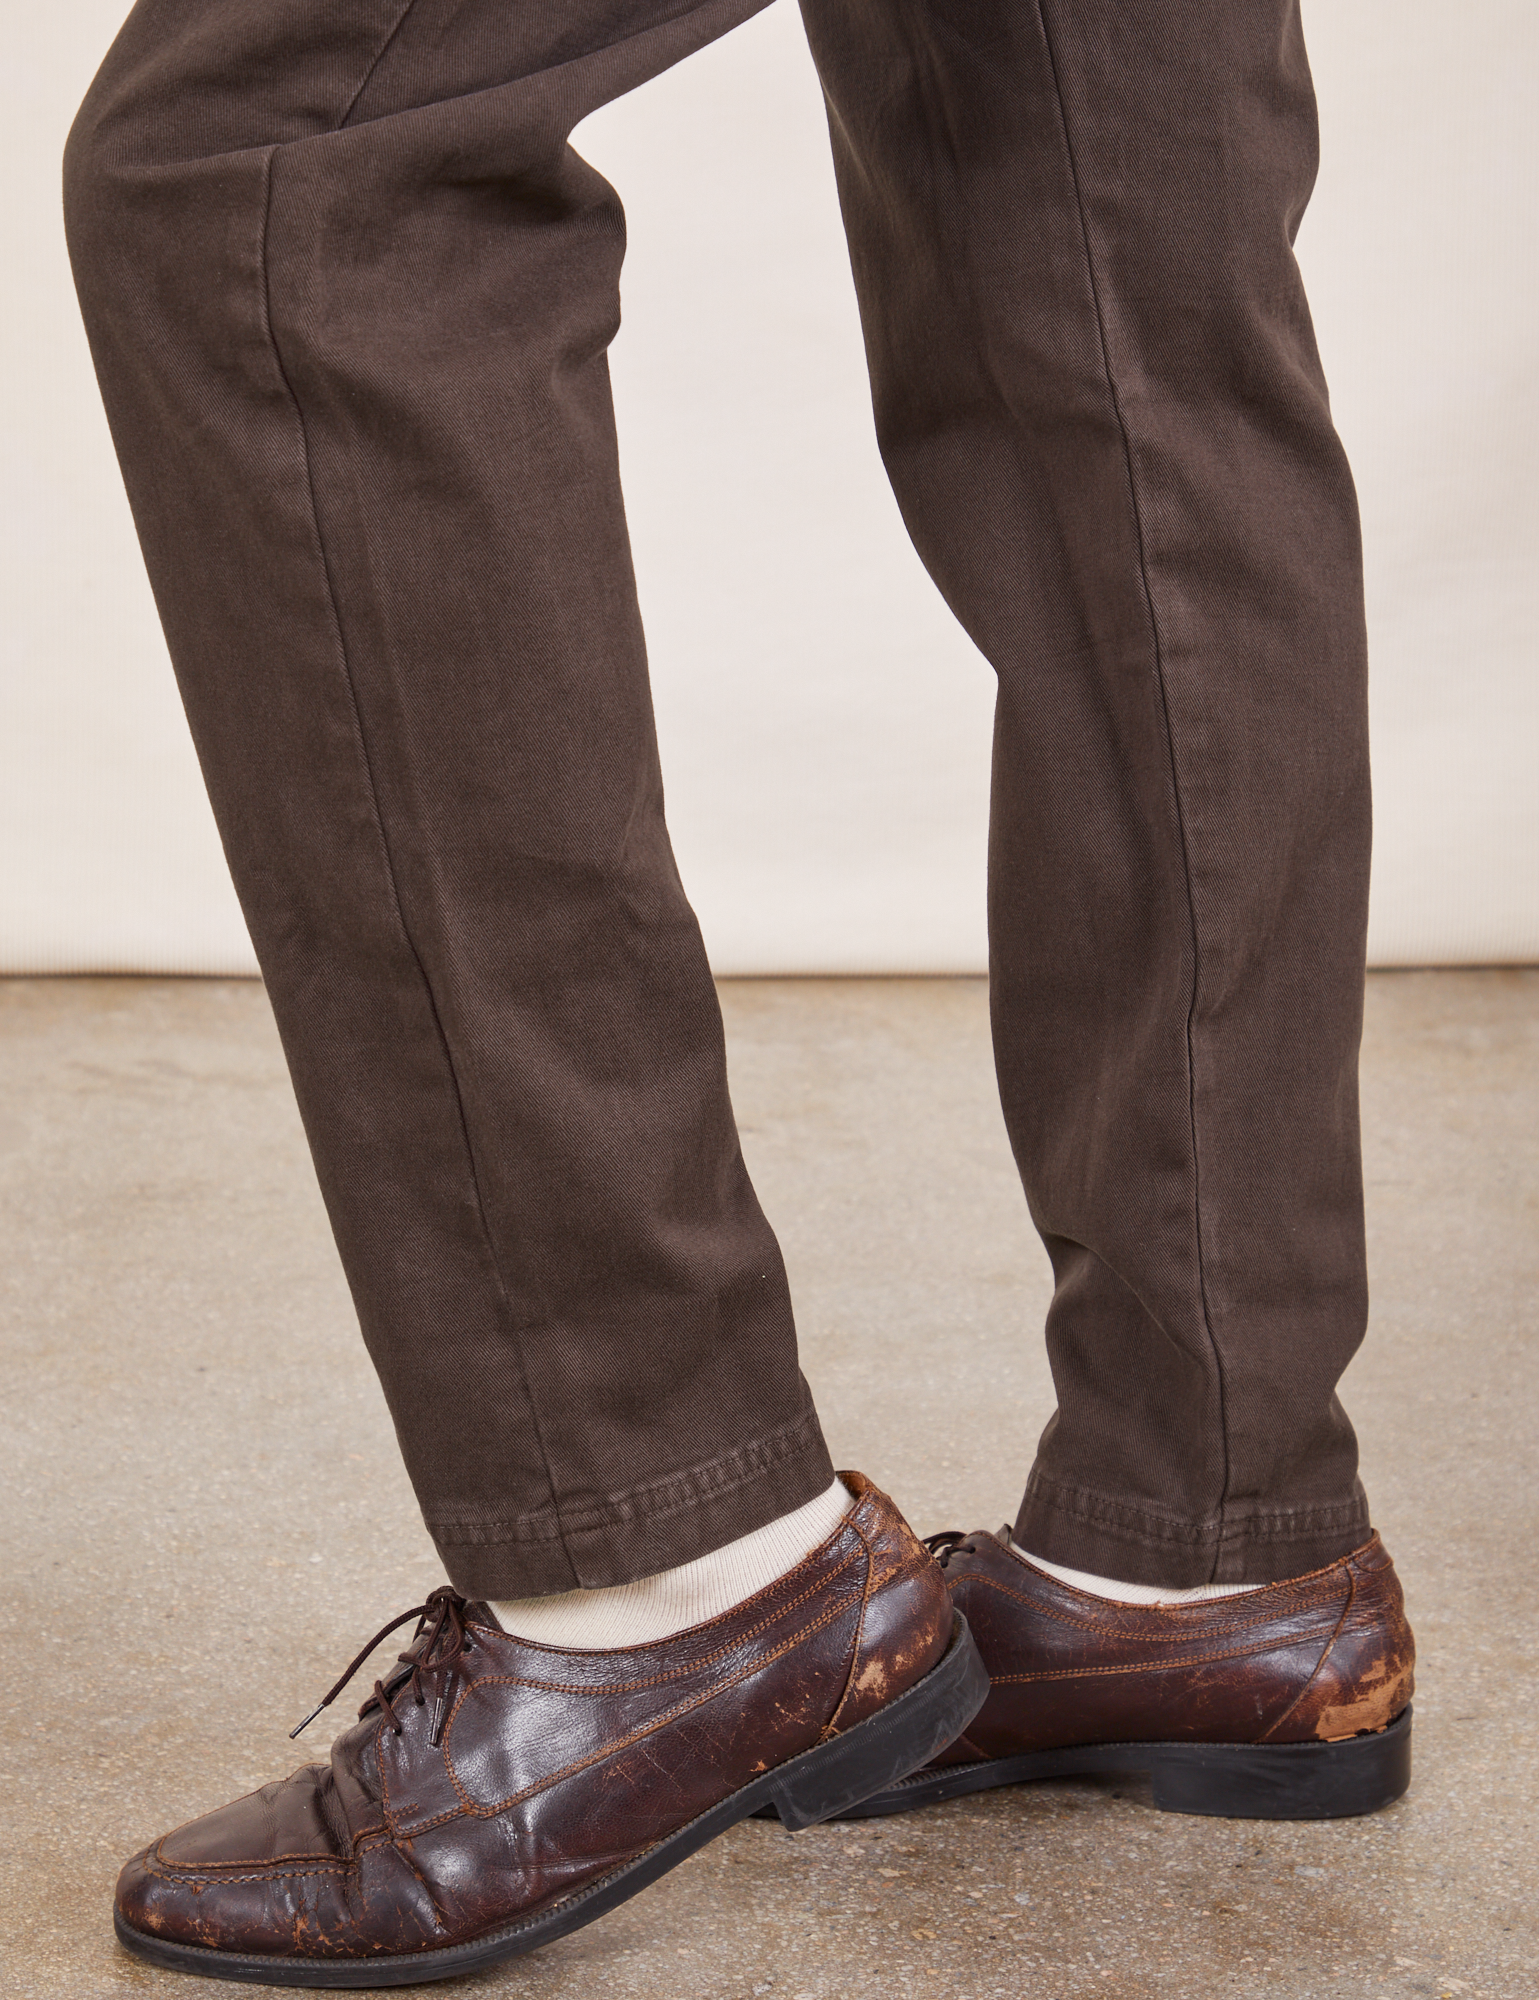 Pencil Pants in Espresso Brown pant leg side view on Jesse